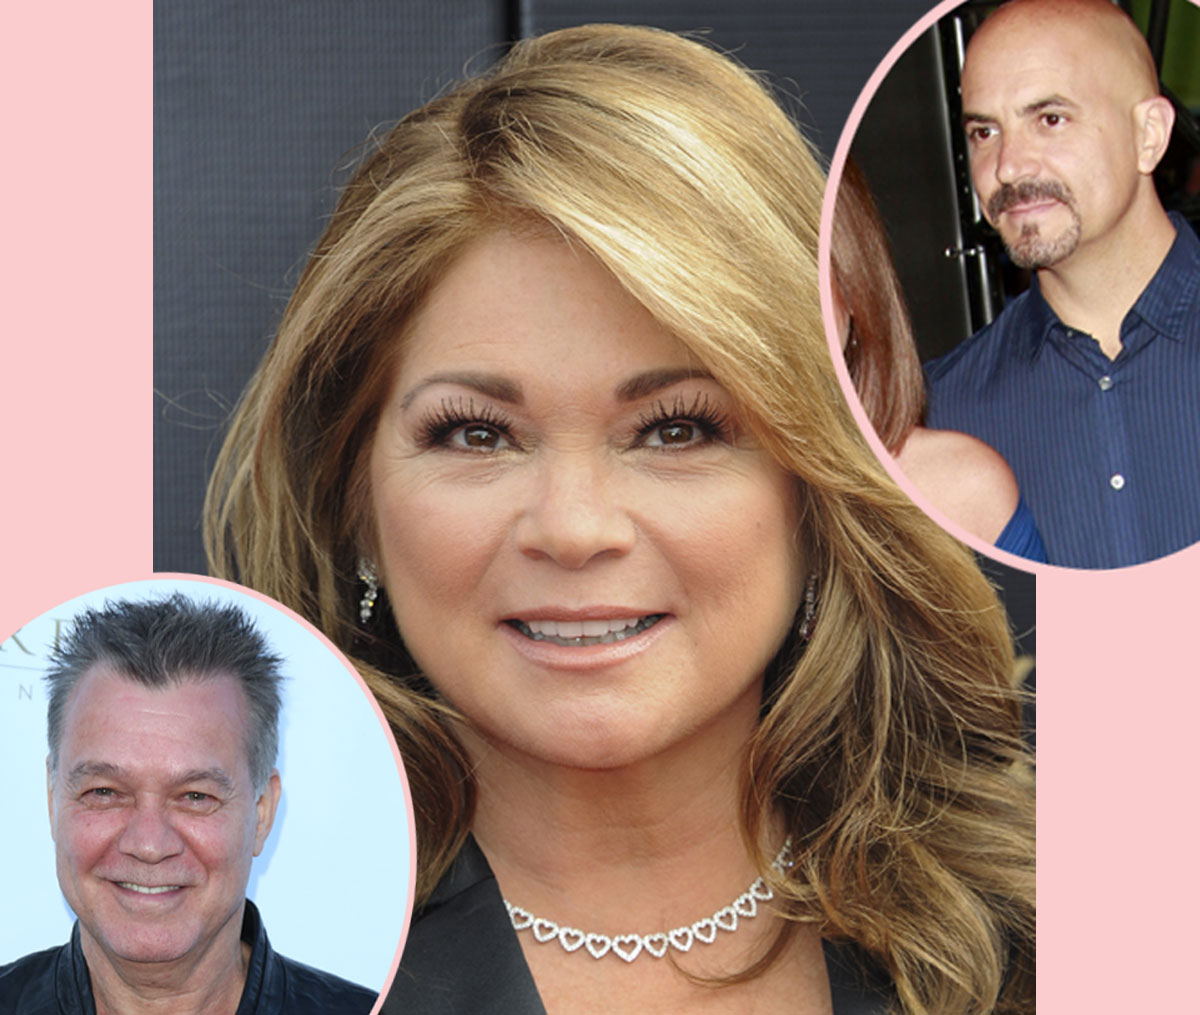 #Valerie Bertinelli Opens Up About Past Relationship With A ‘Narcissist’ Who Called Her ‘Fat & Lazy’